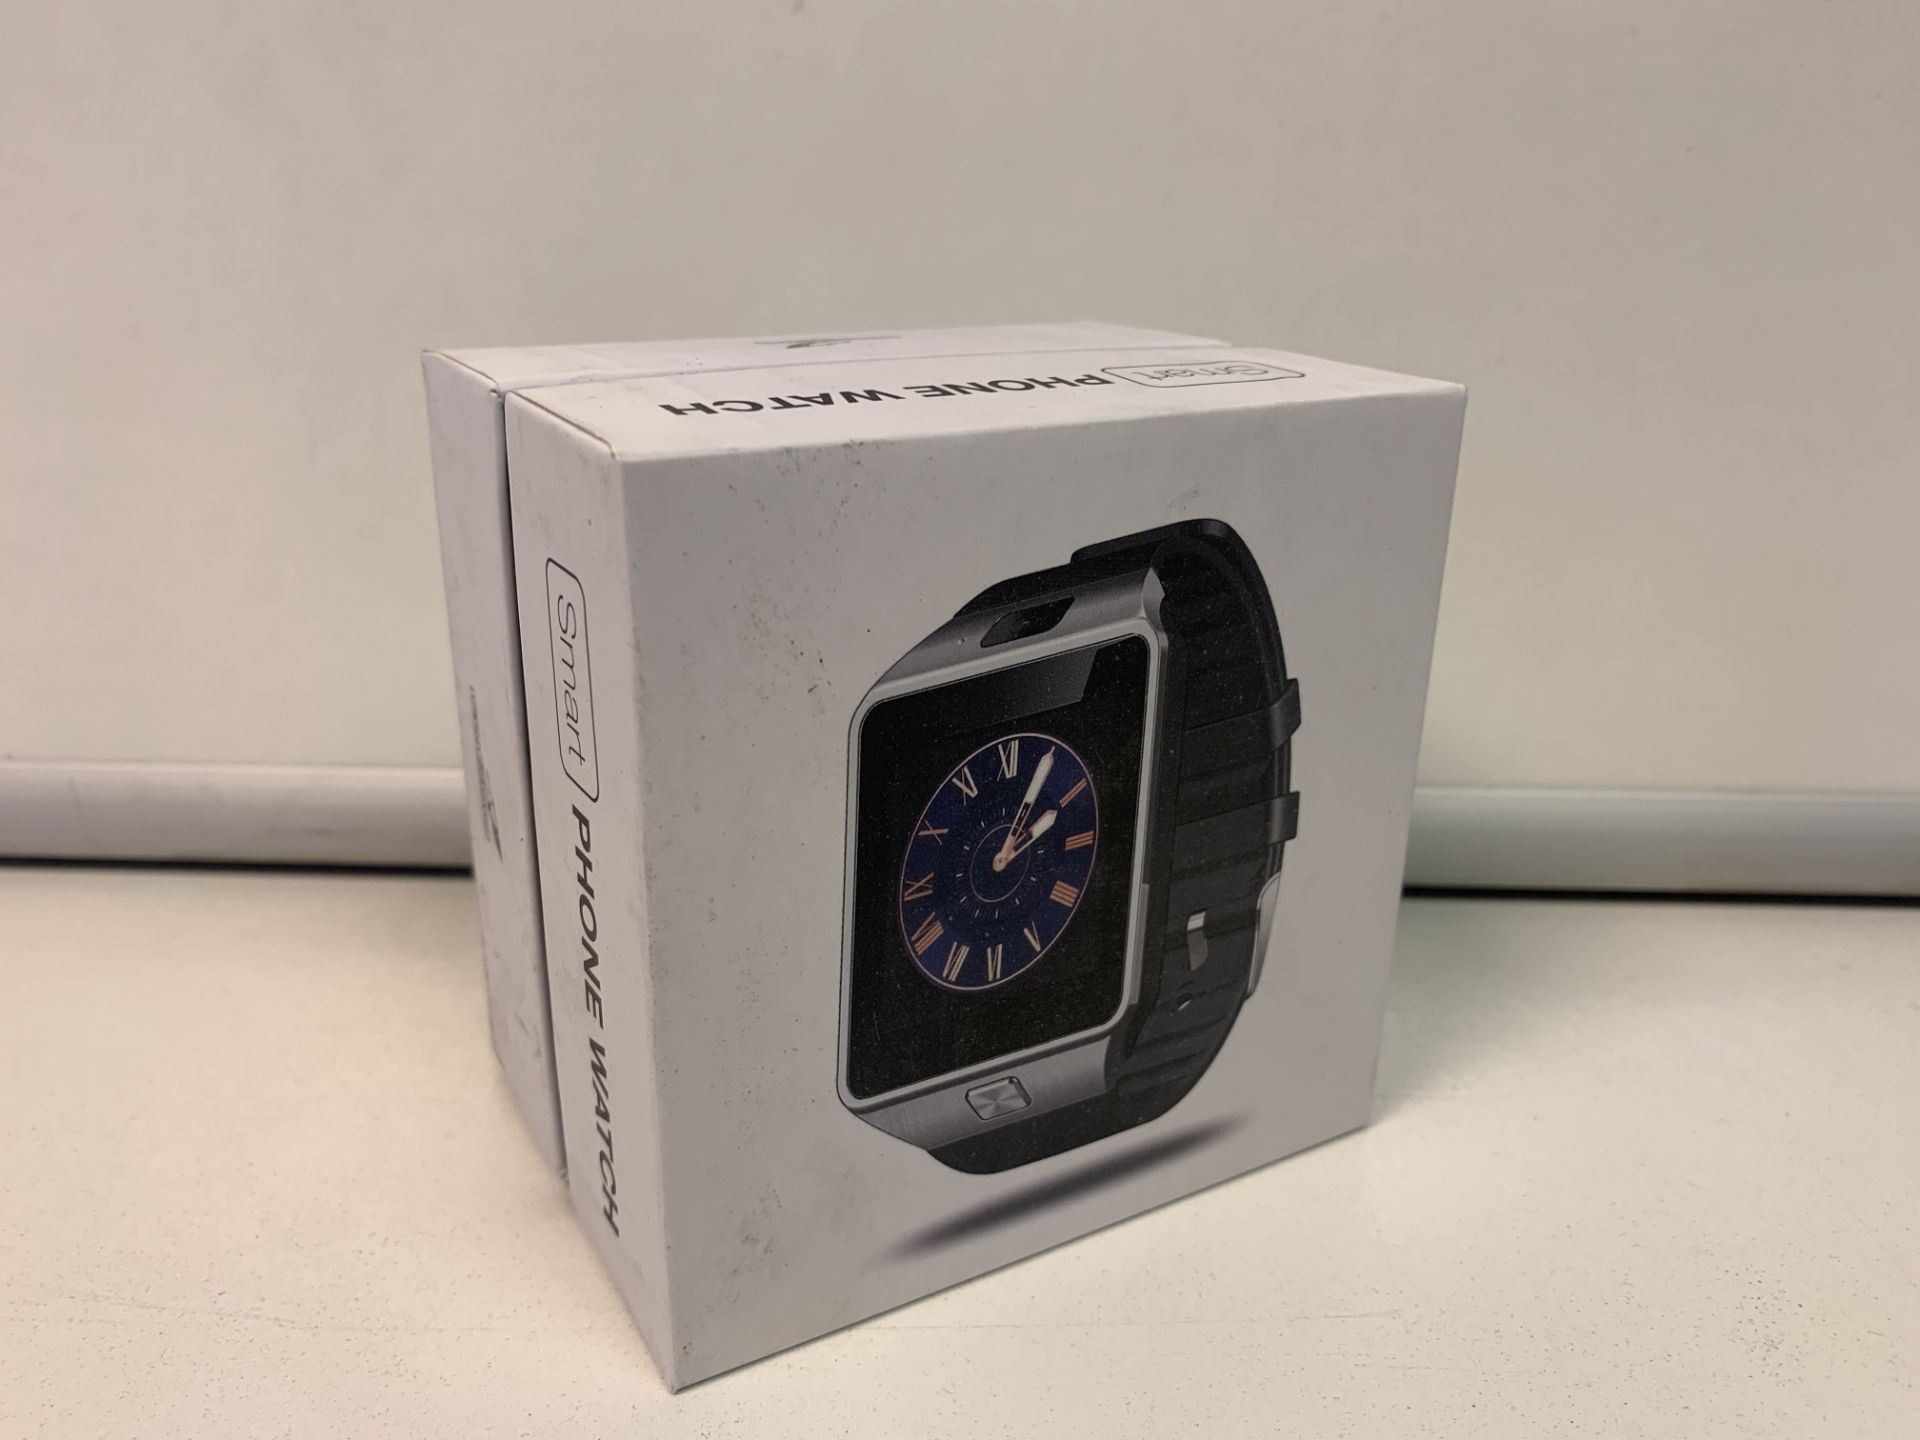 5 X BRAND NEW FALCON SMART PHONE WATCHES RRP £49.99 EACH